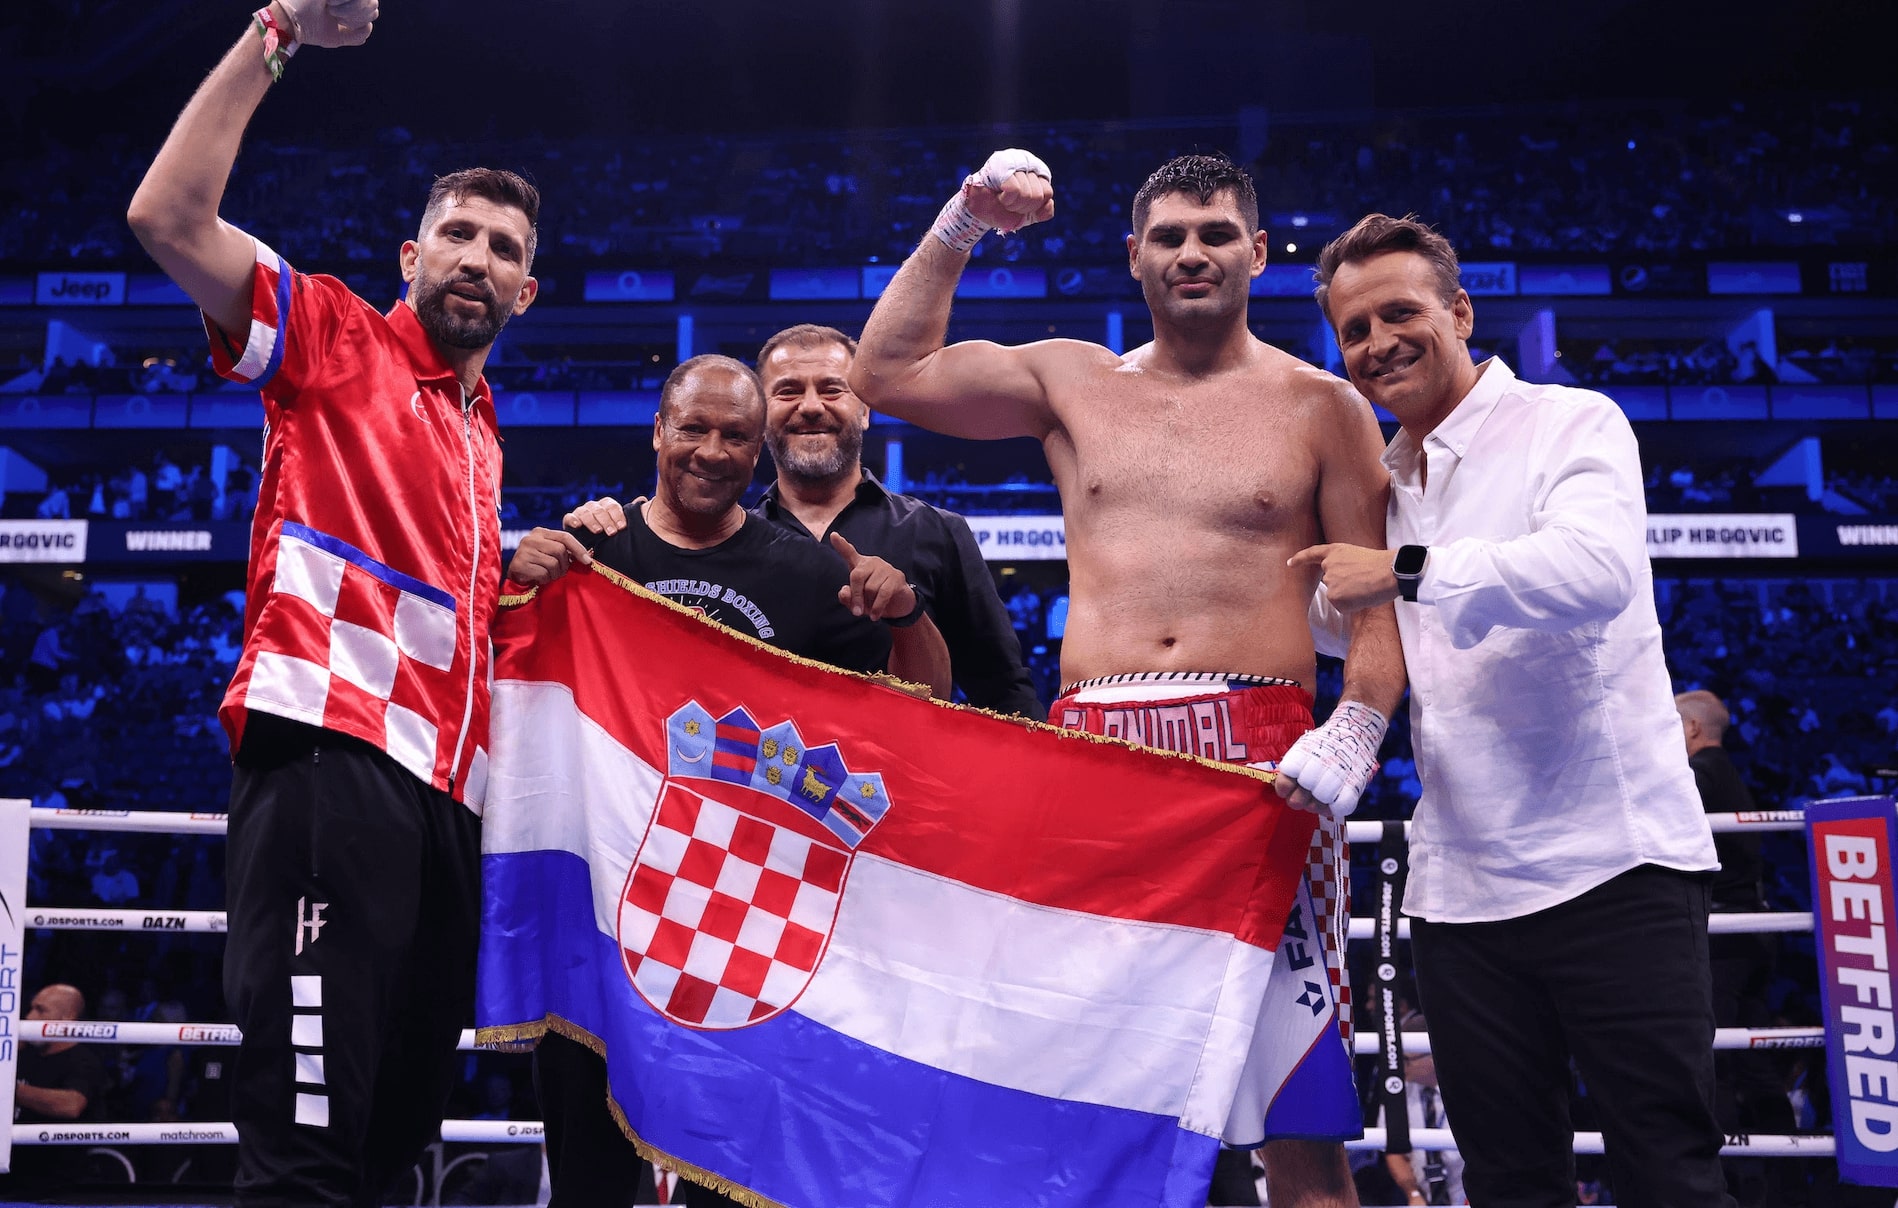 Hrgovic to be ringside for Usyk Vs Dubois in Wroclaw